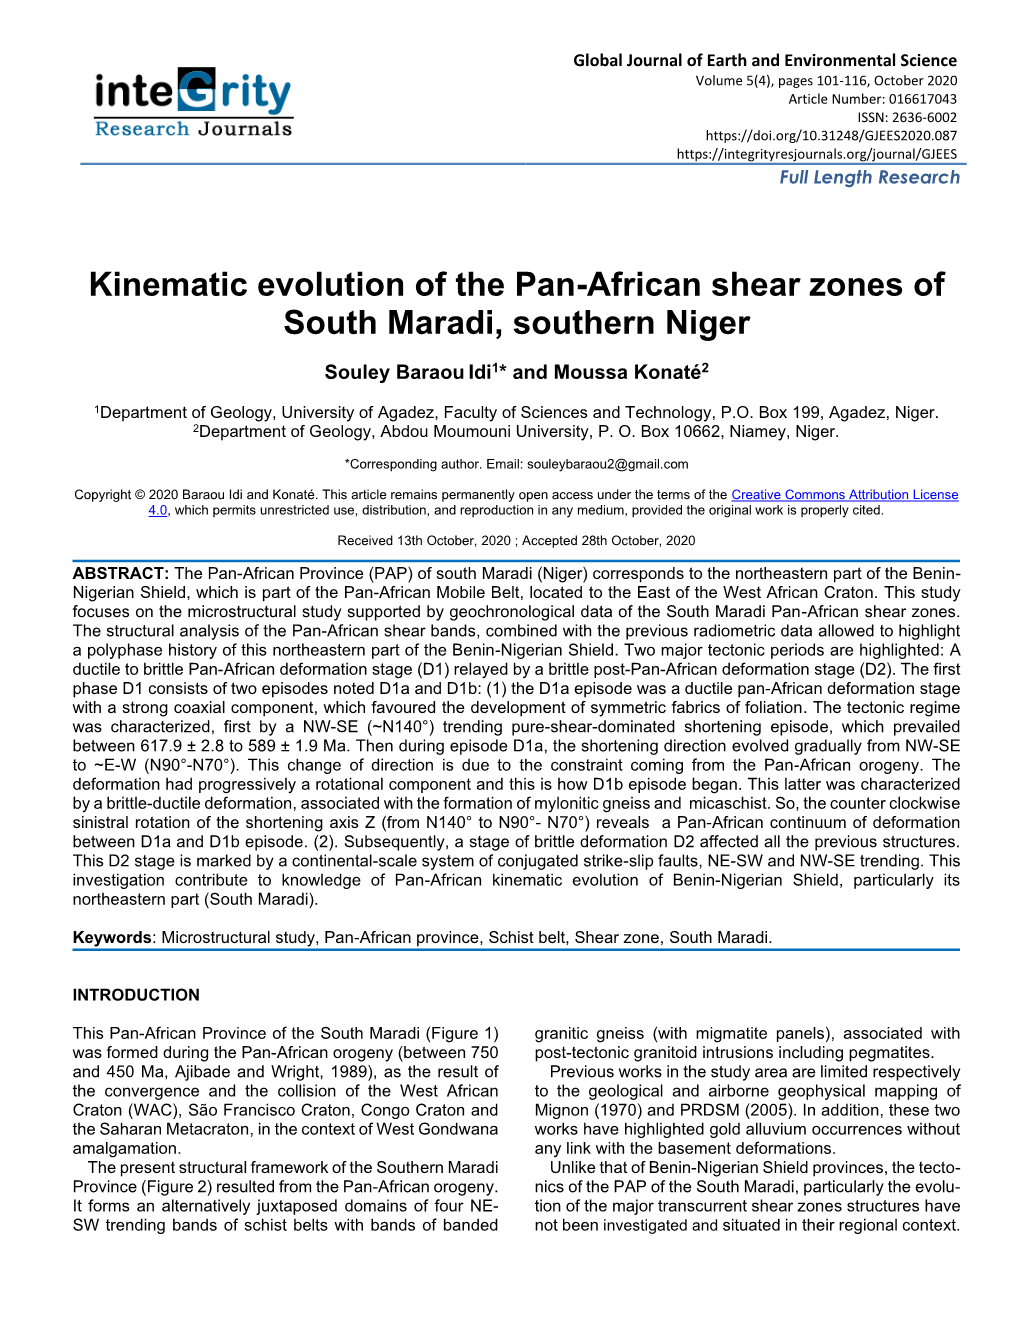 Kinematic Evolution of the Pan-African Shear Zones of South Maradi, Southern Niger